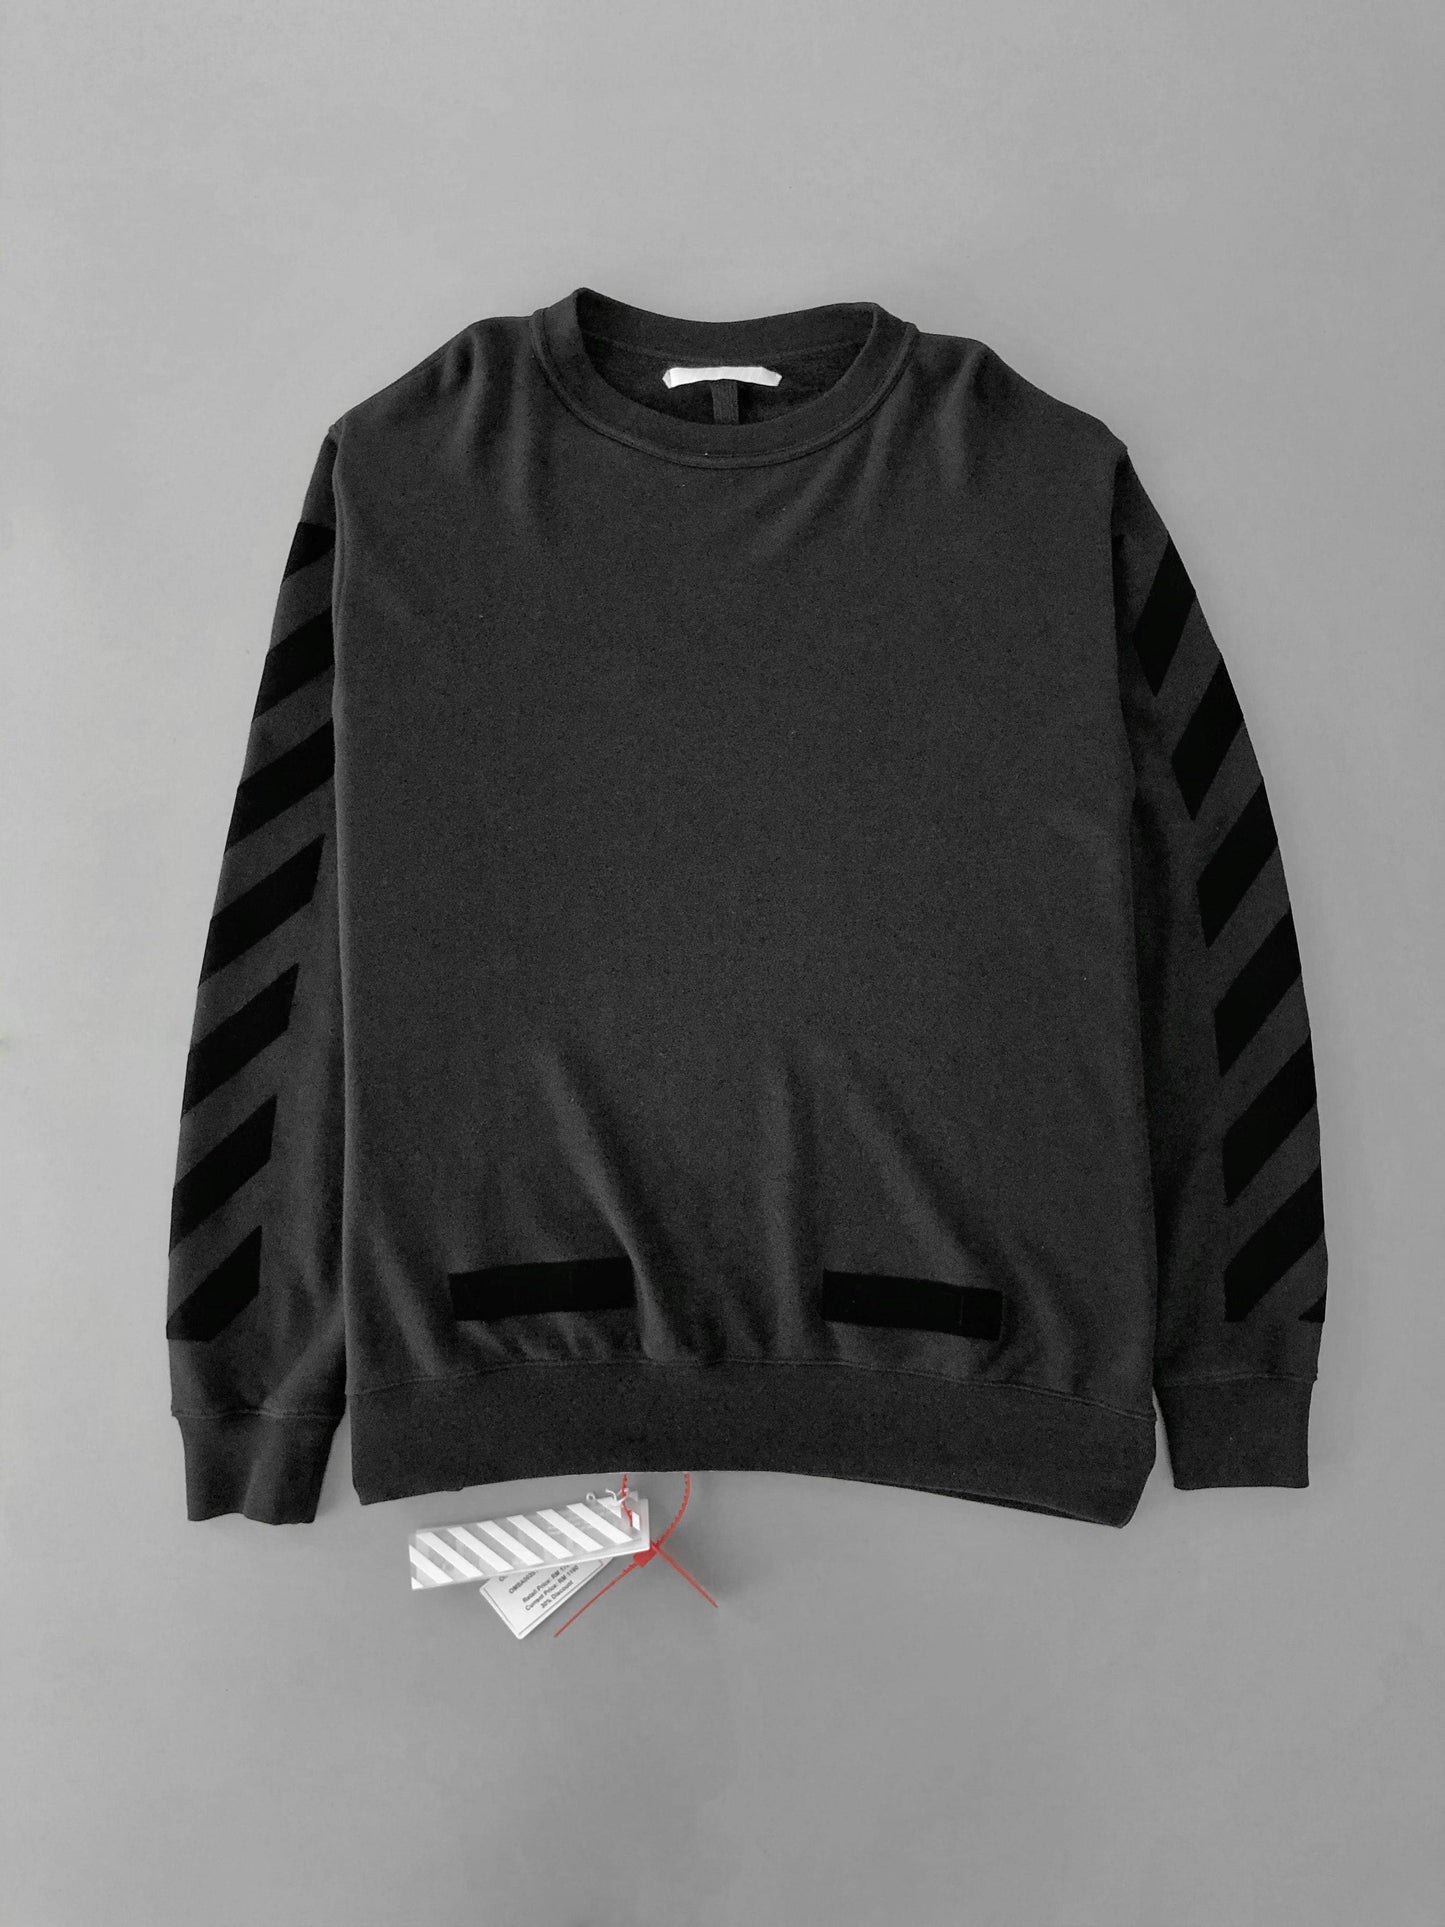 Off White Tone on Tone Crewneck SS18 Collection